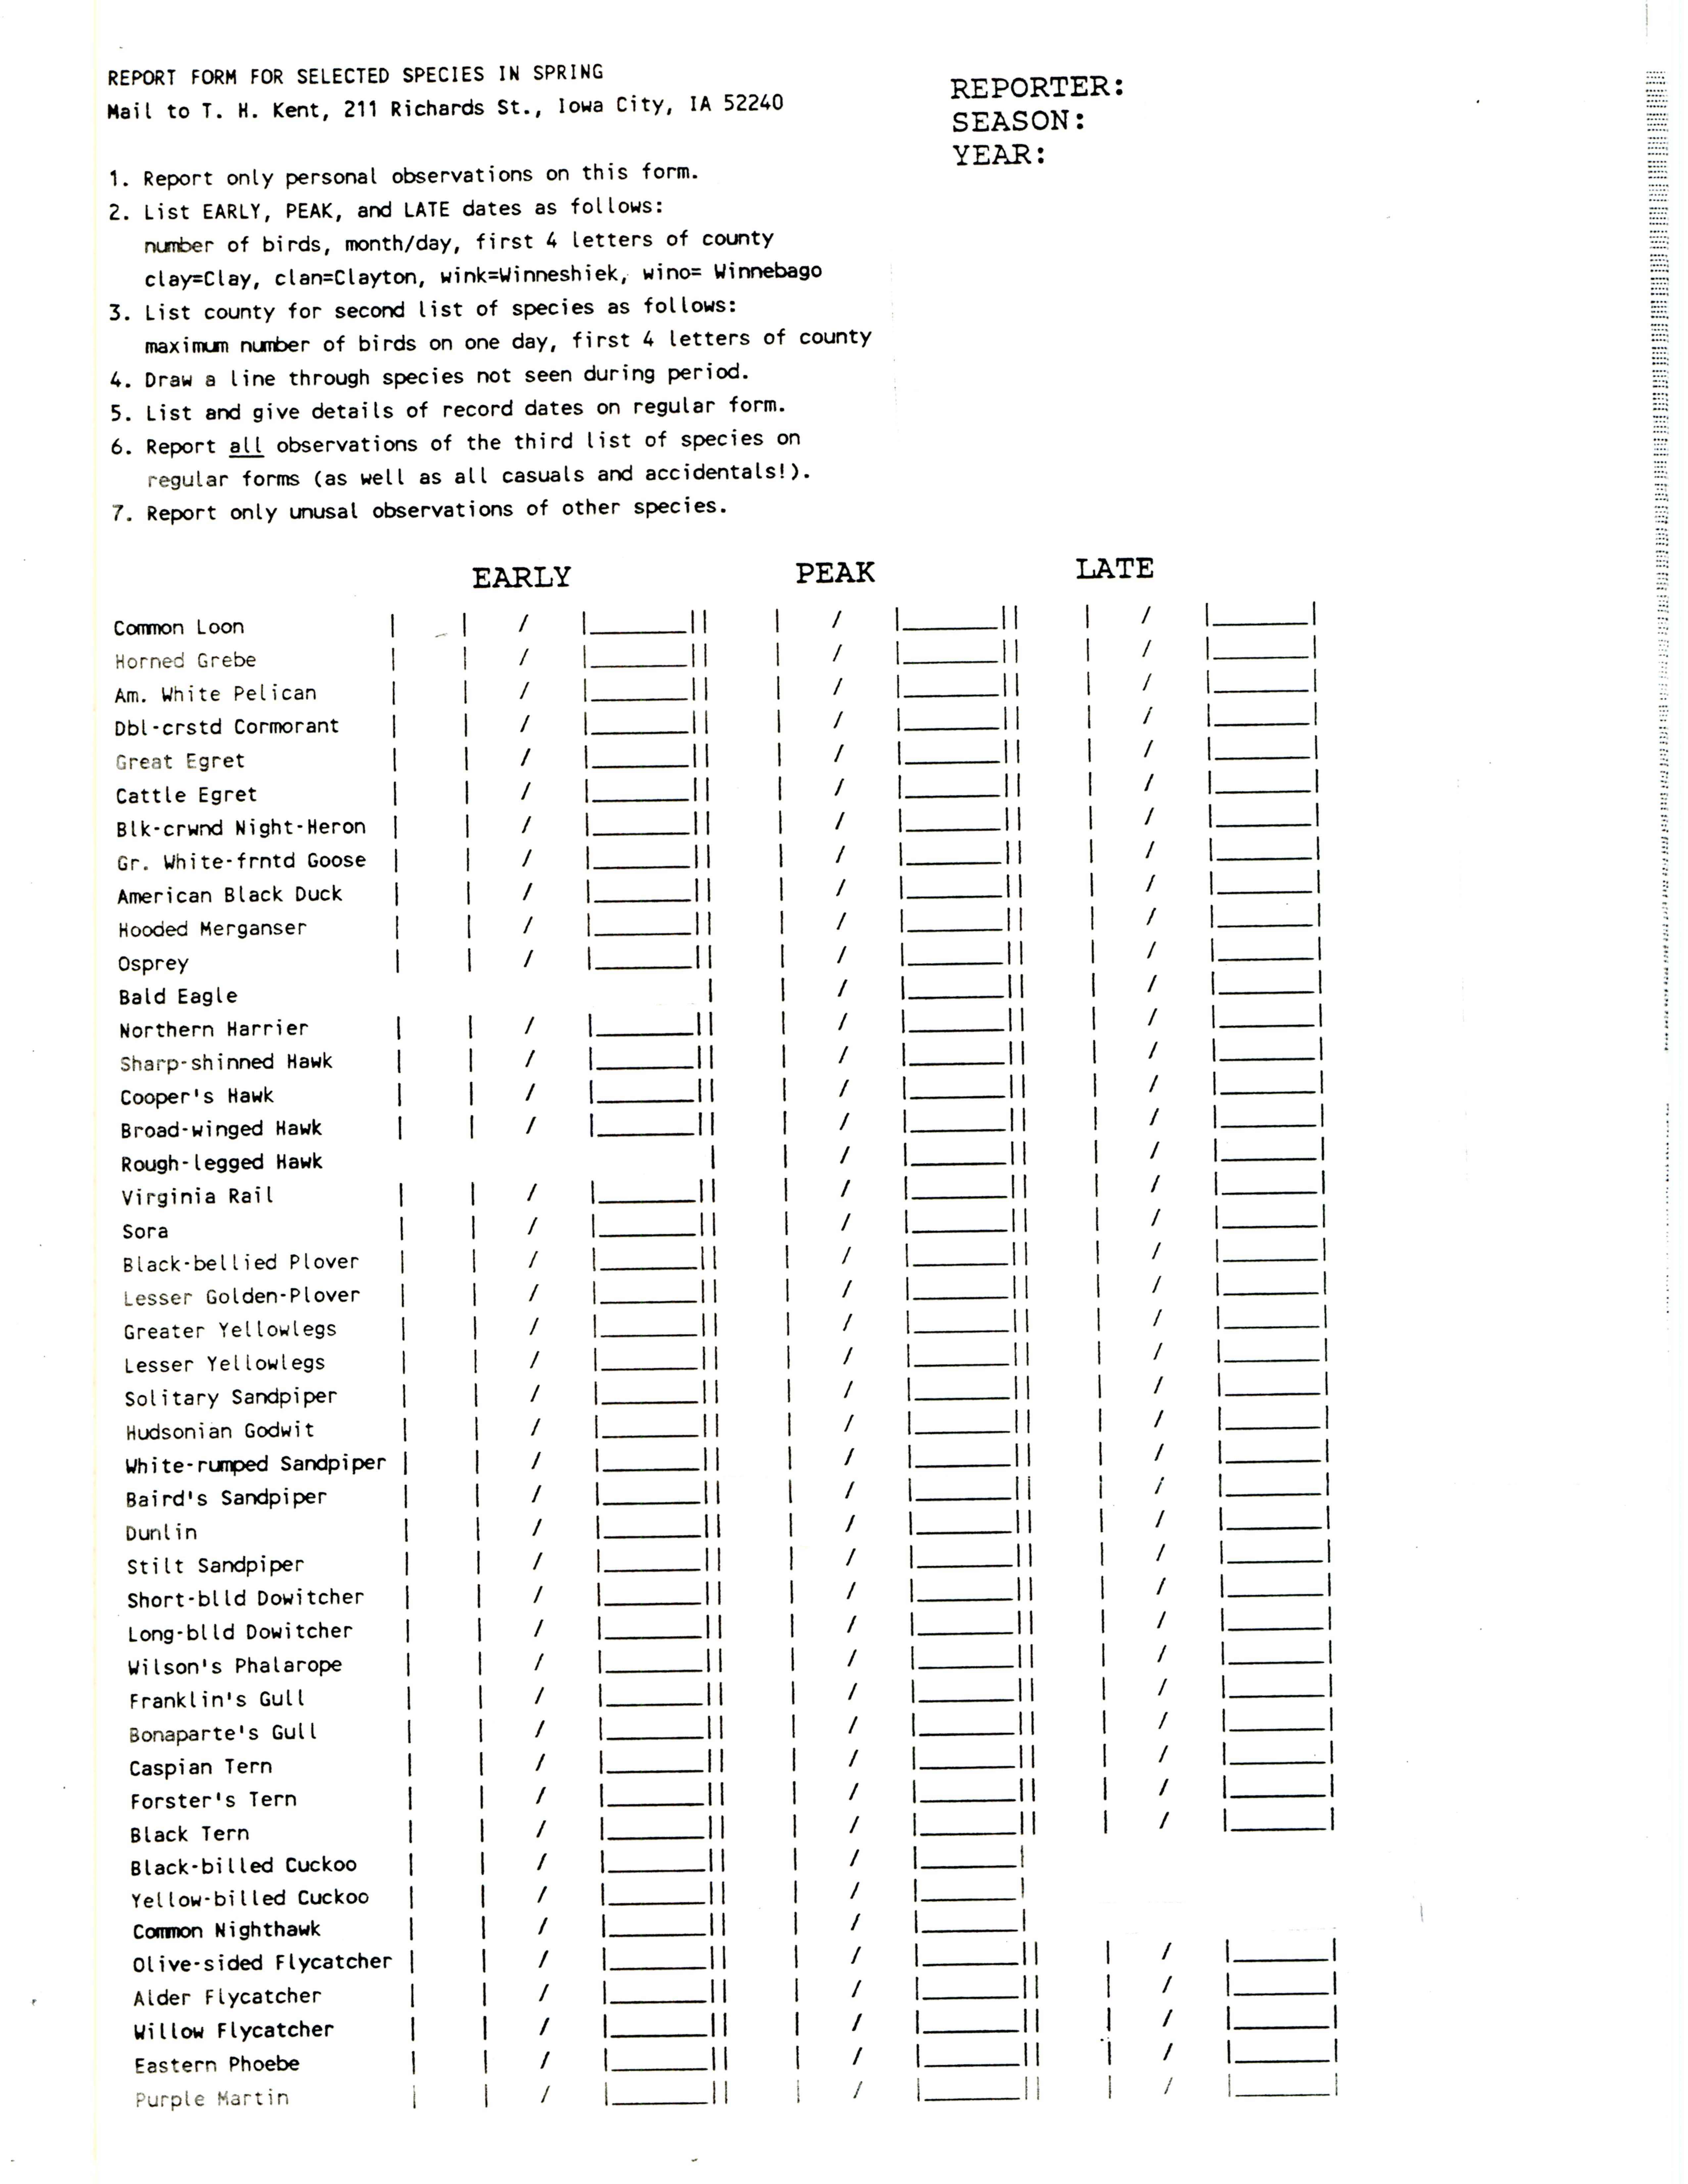 Report form for selected species in spring